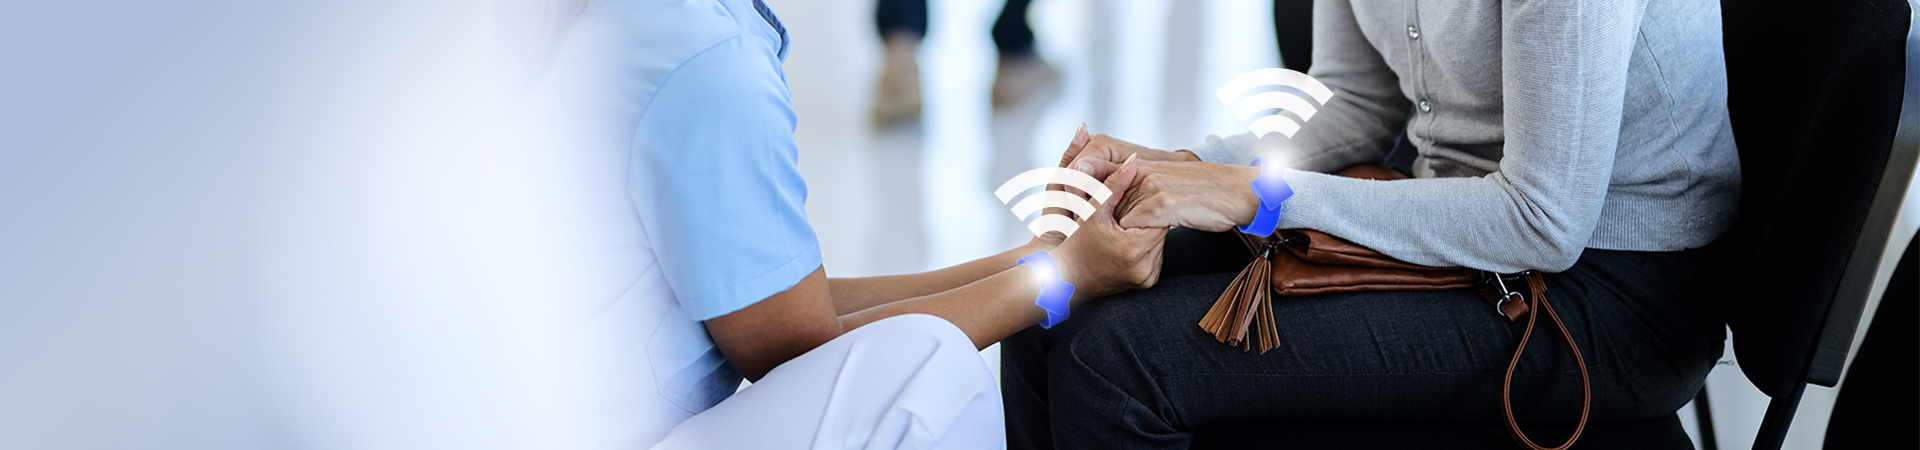 IoT Consulting for a Chain of Behavioral Health Facilities